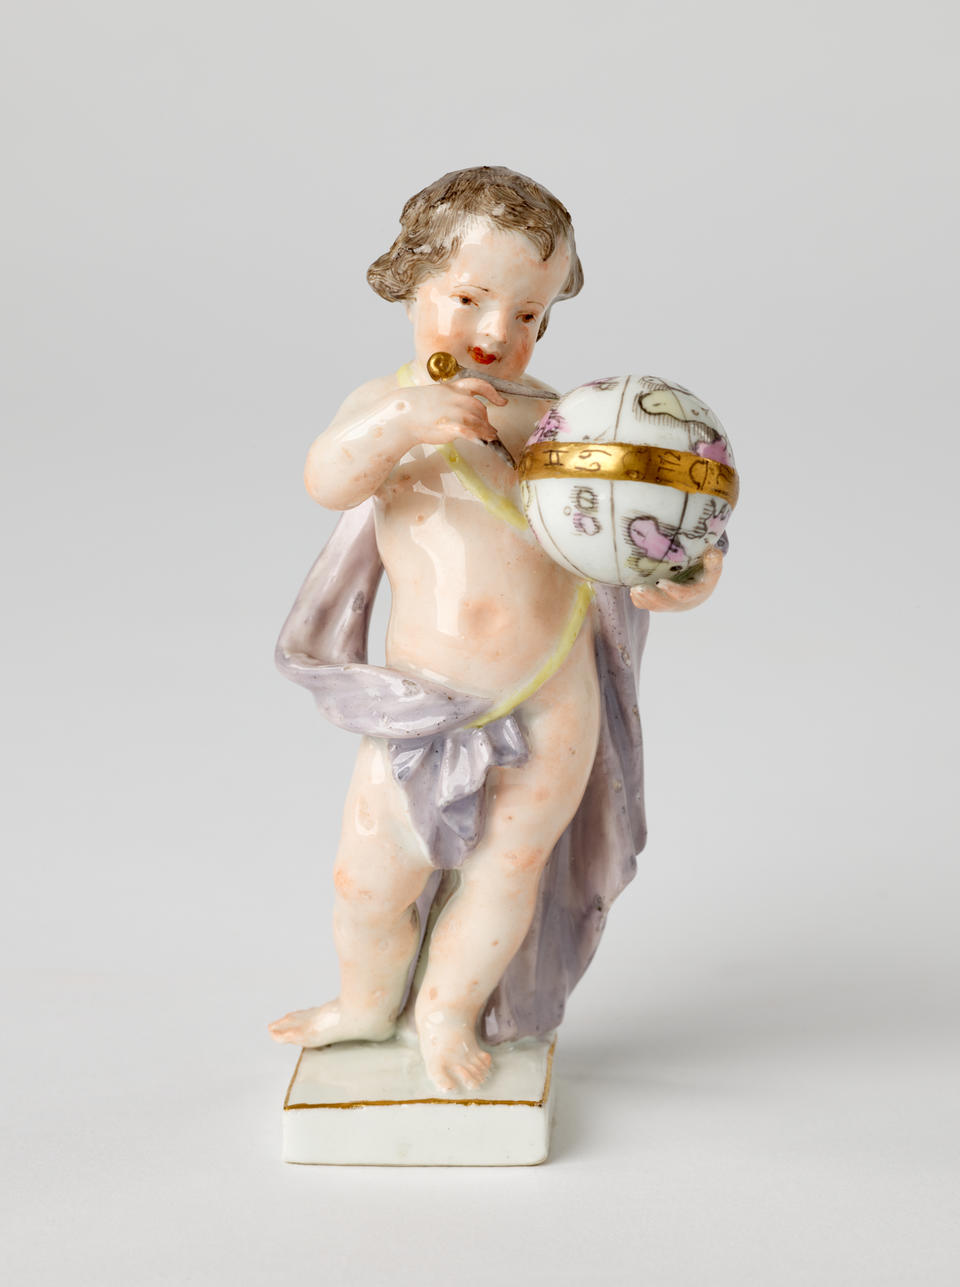 A sculptural putto figure holding a globe that is gilded. The putto has brown hair, red lips, and a light purple fabric draped across it. 